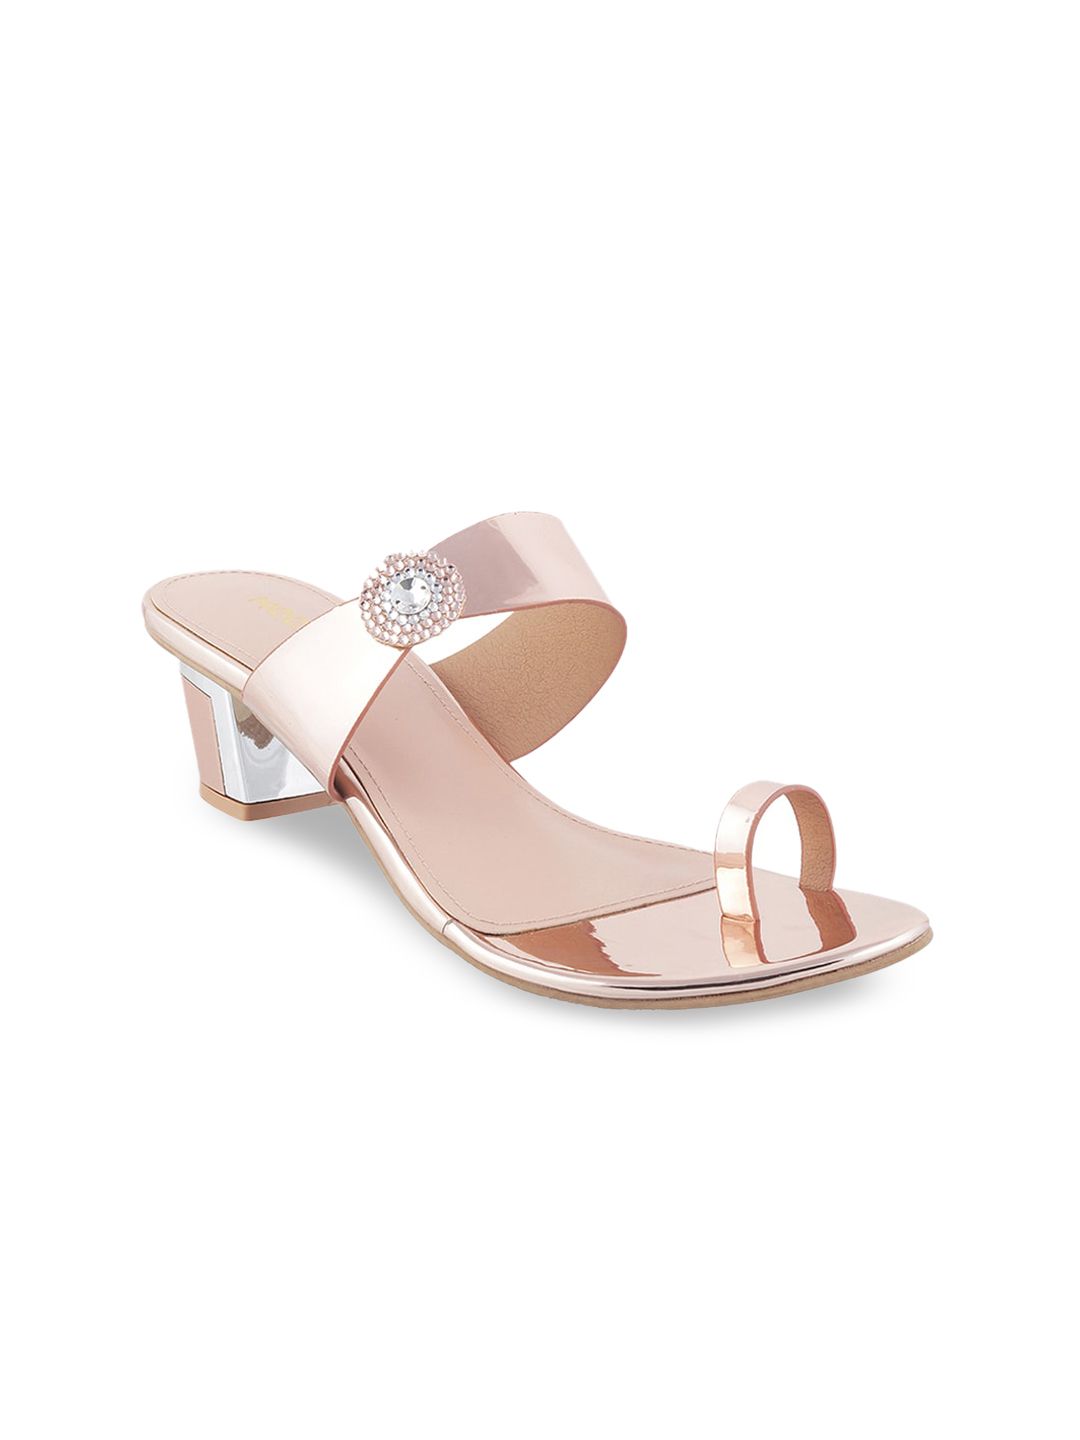 Mochi Tan Embellished Block Sandals Price in India